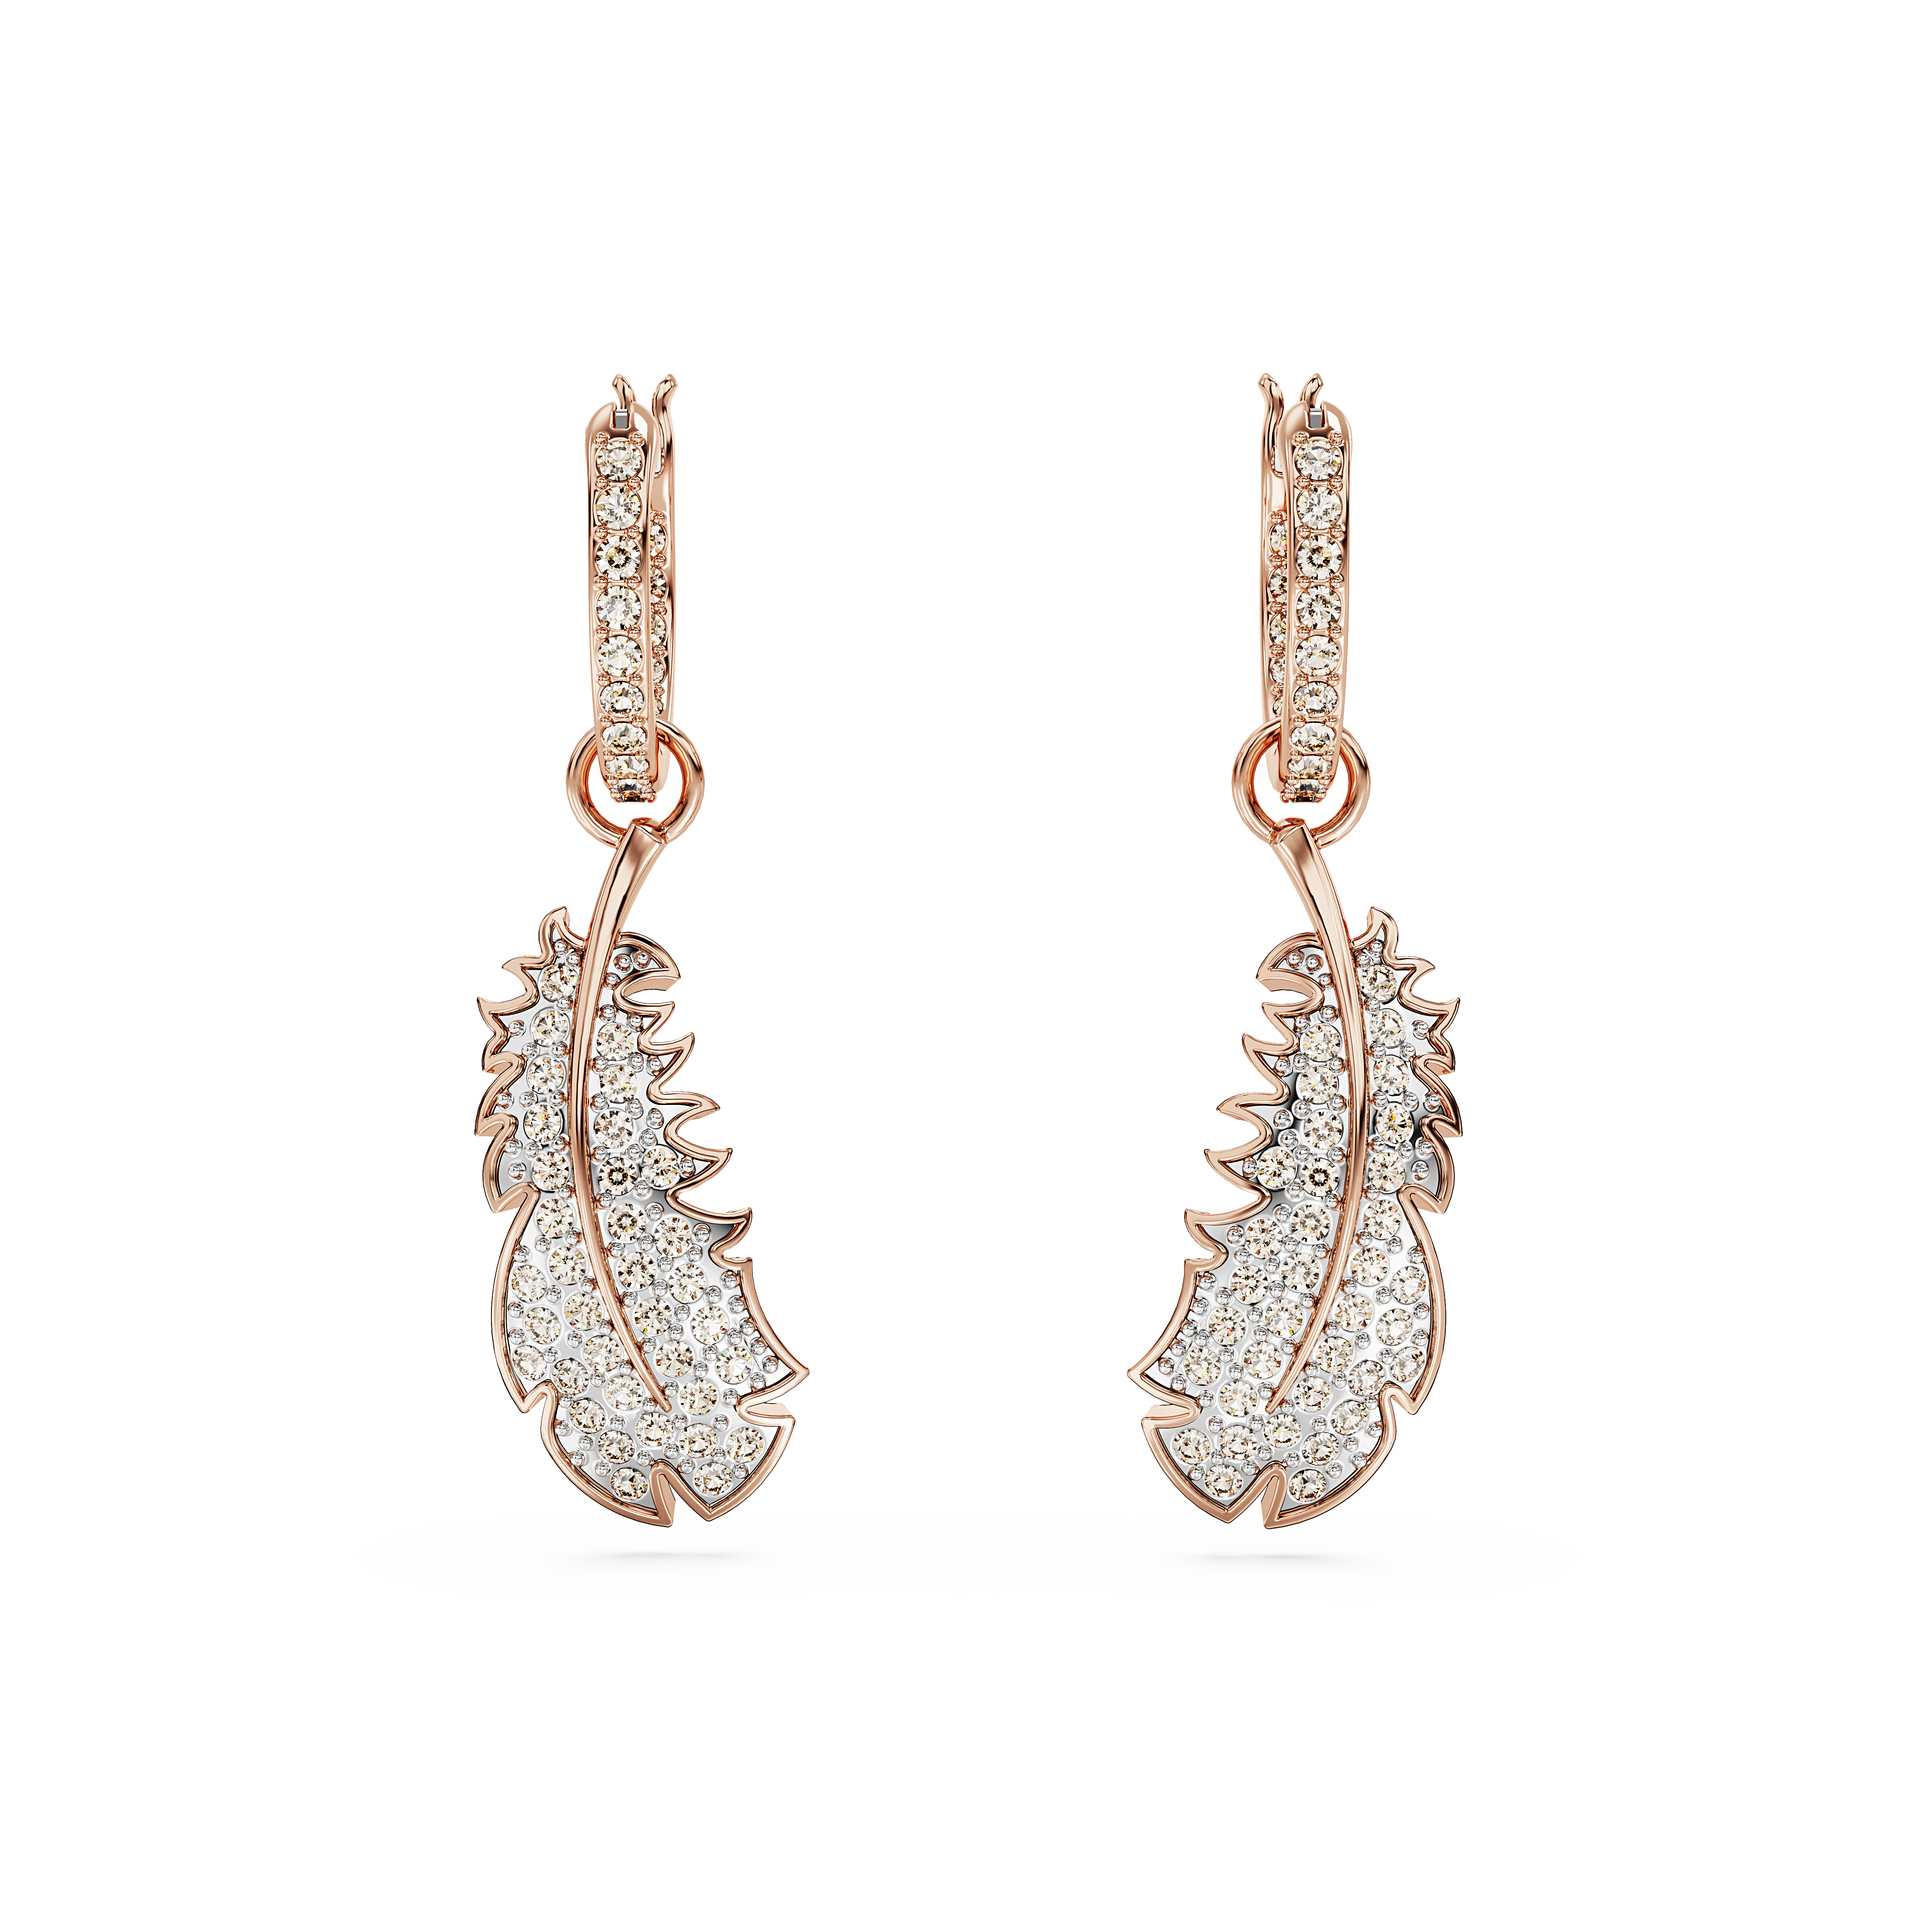 SWAROVSKI NICE DROP EARRINGS, FEATHER, WHITE, ROSE GOLD-TONE PLATED 5663486